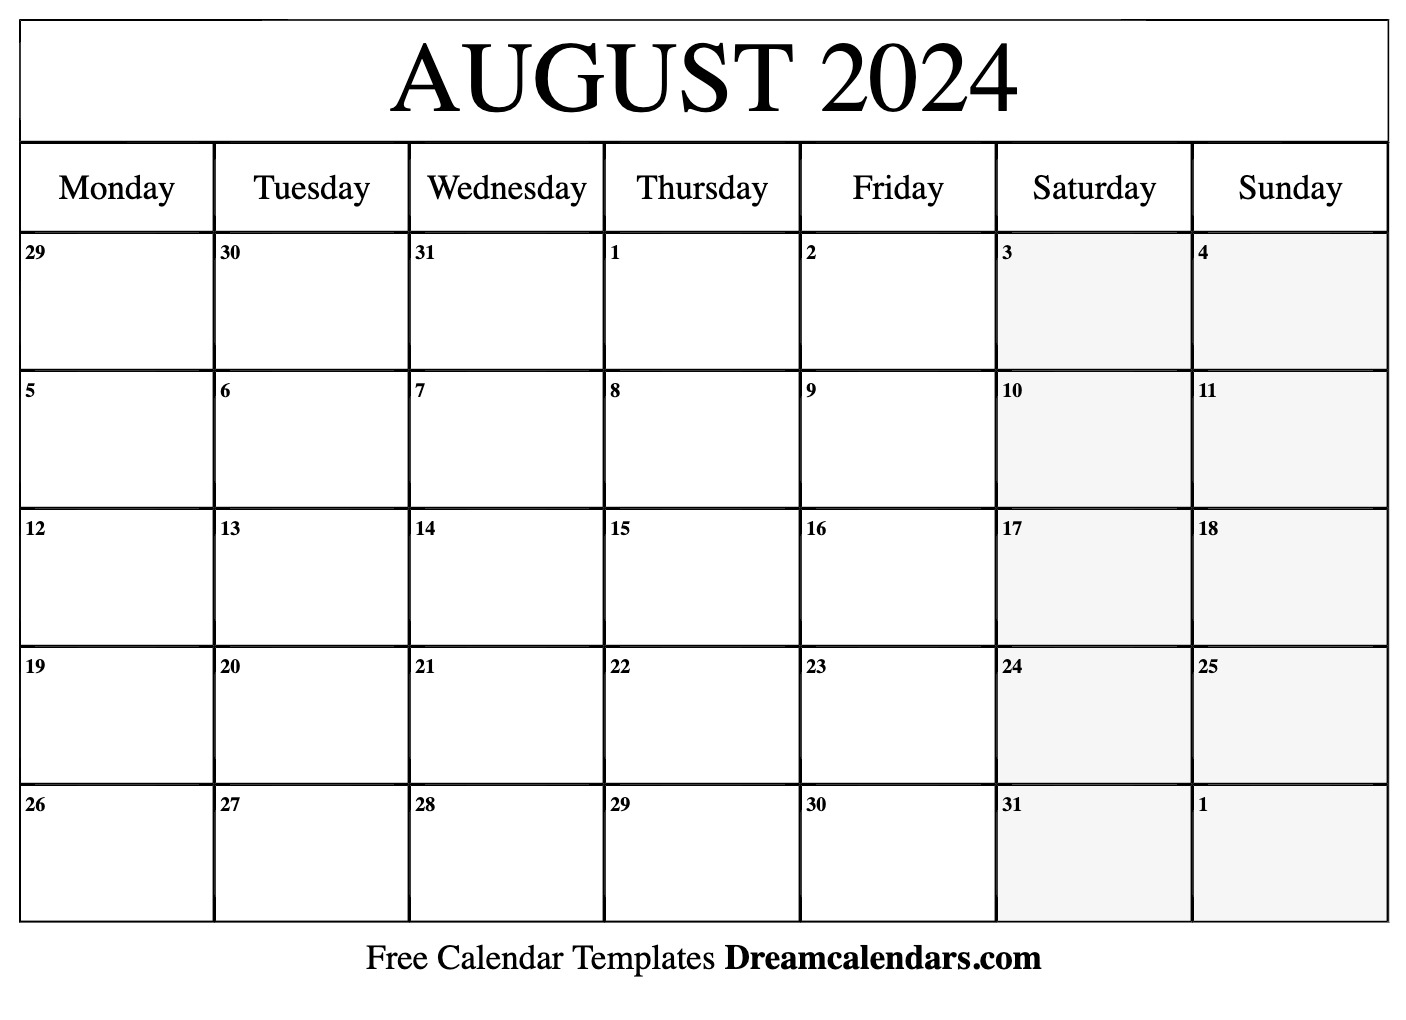 August 2024 Calendar | Free Blank Printable With Holidays for June July August Calendar Printable 2024